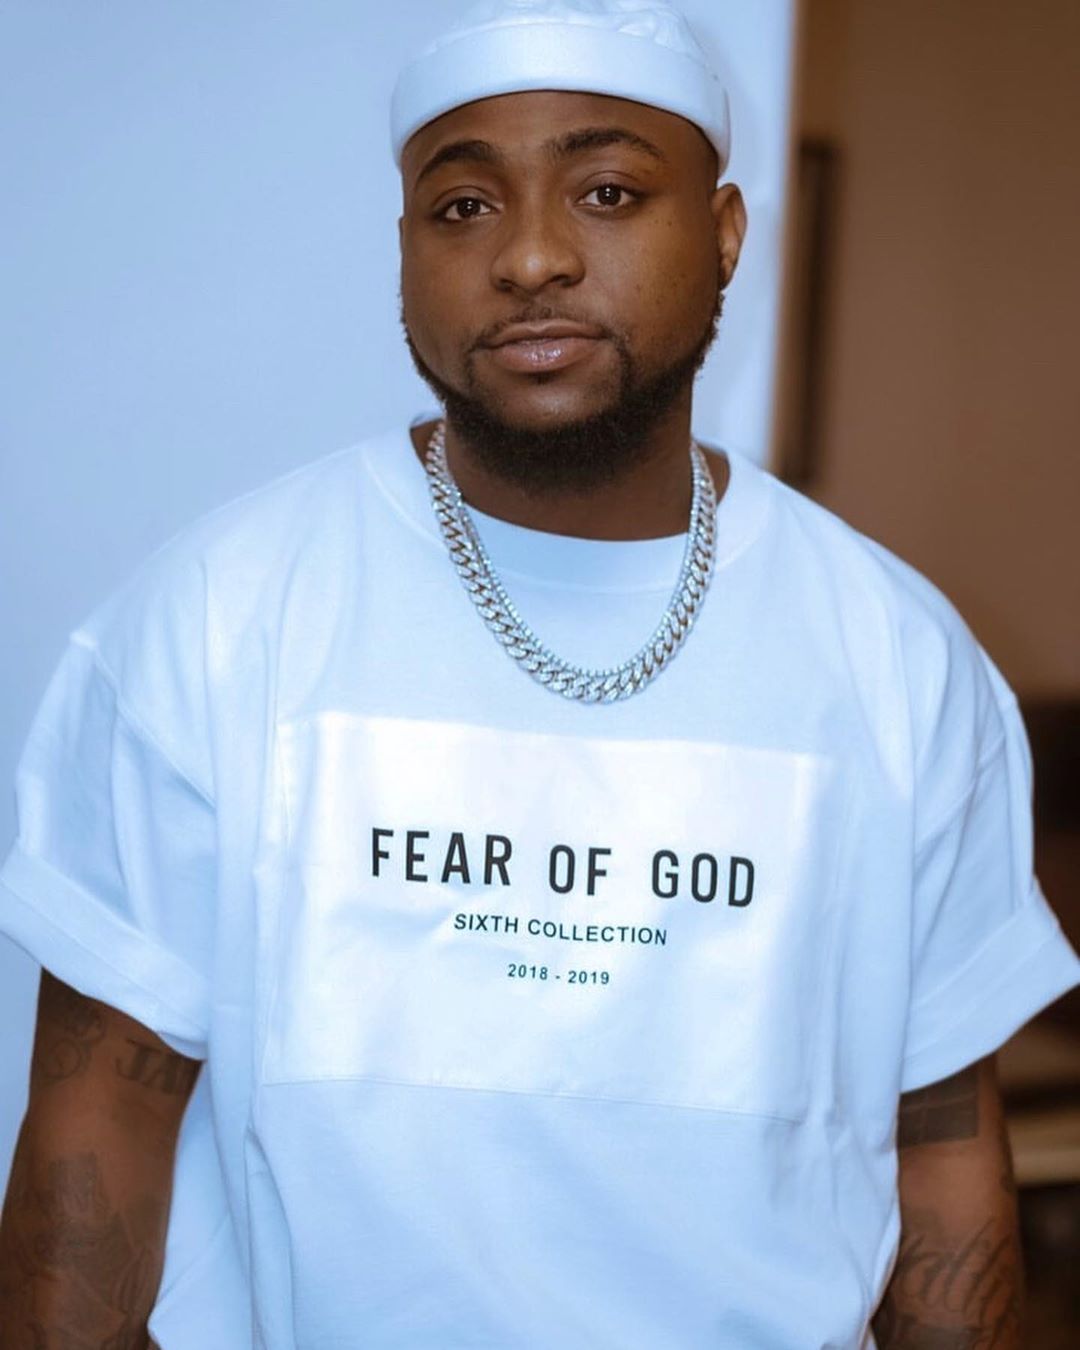 Davido is 7th most influential African